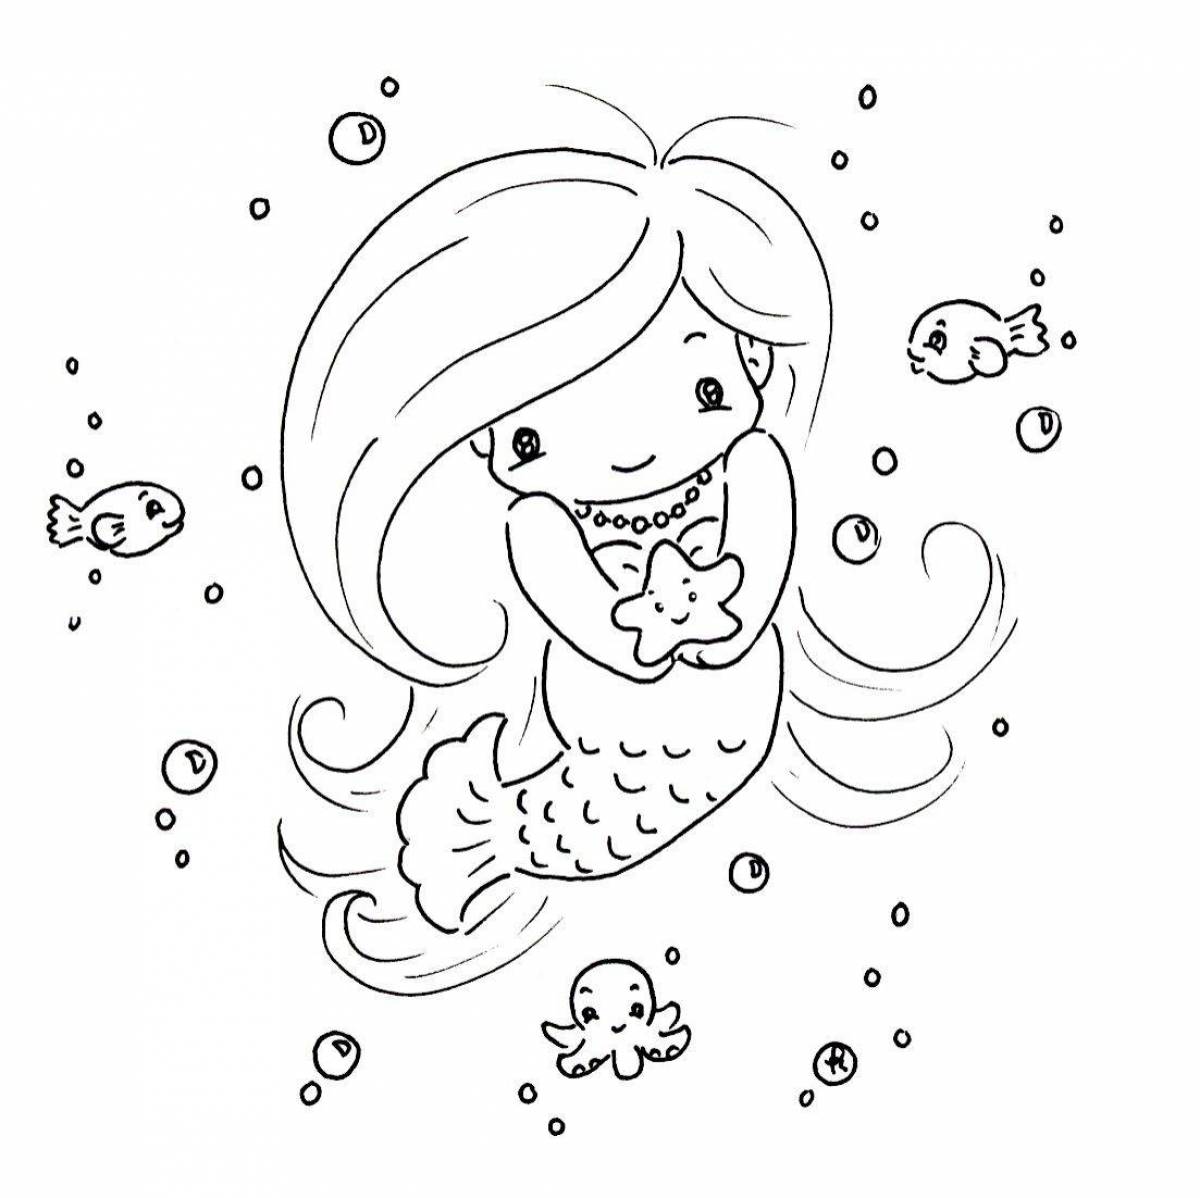 Delightful little mermaid coloring book for kids